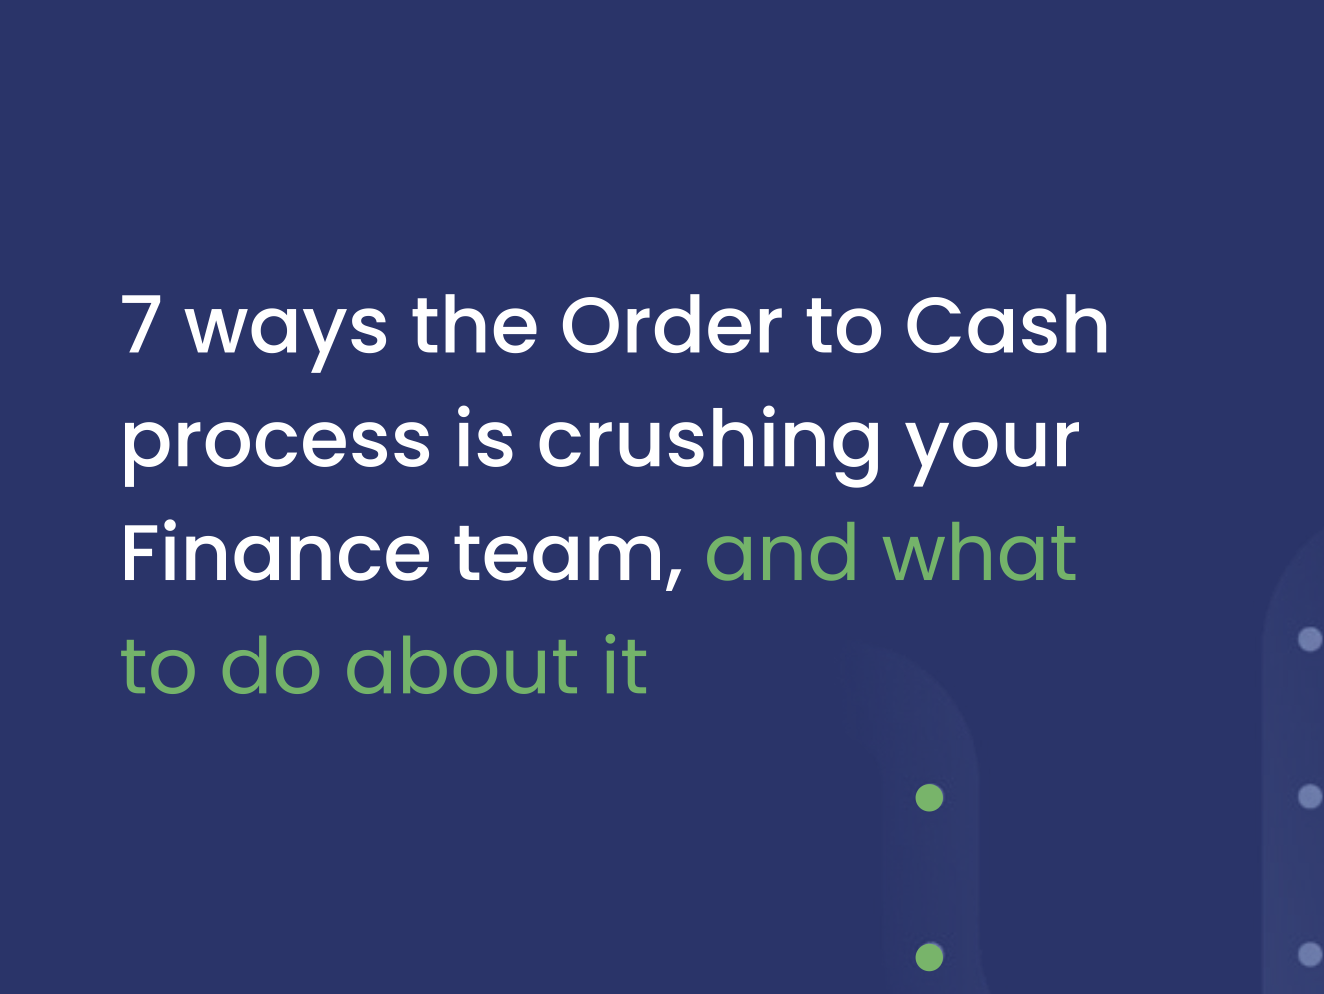 7 ways the Order to Cash process is crushing your Finance team, and what to do about it